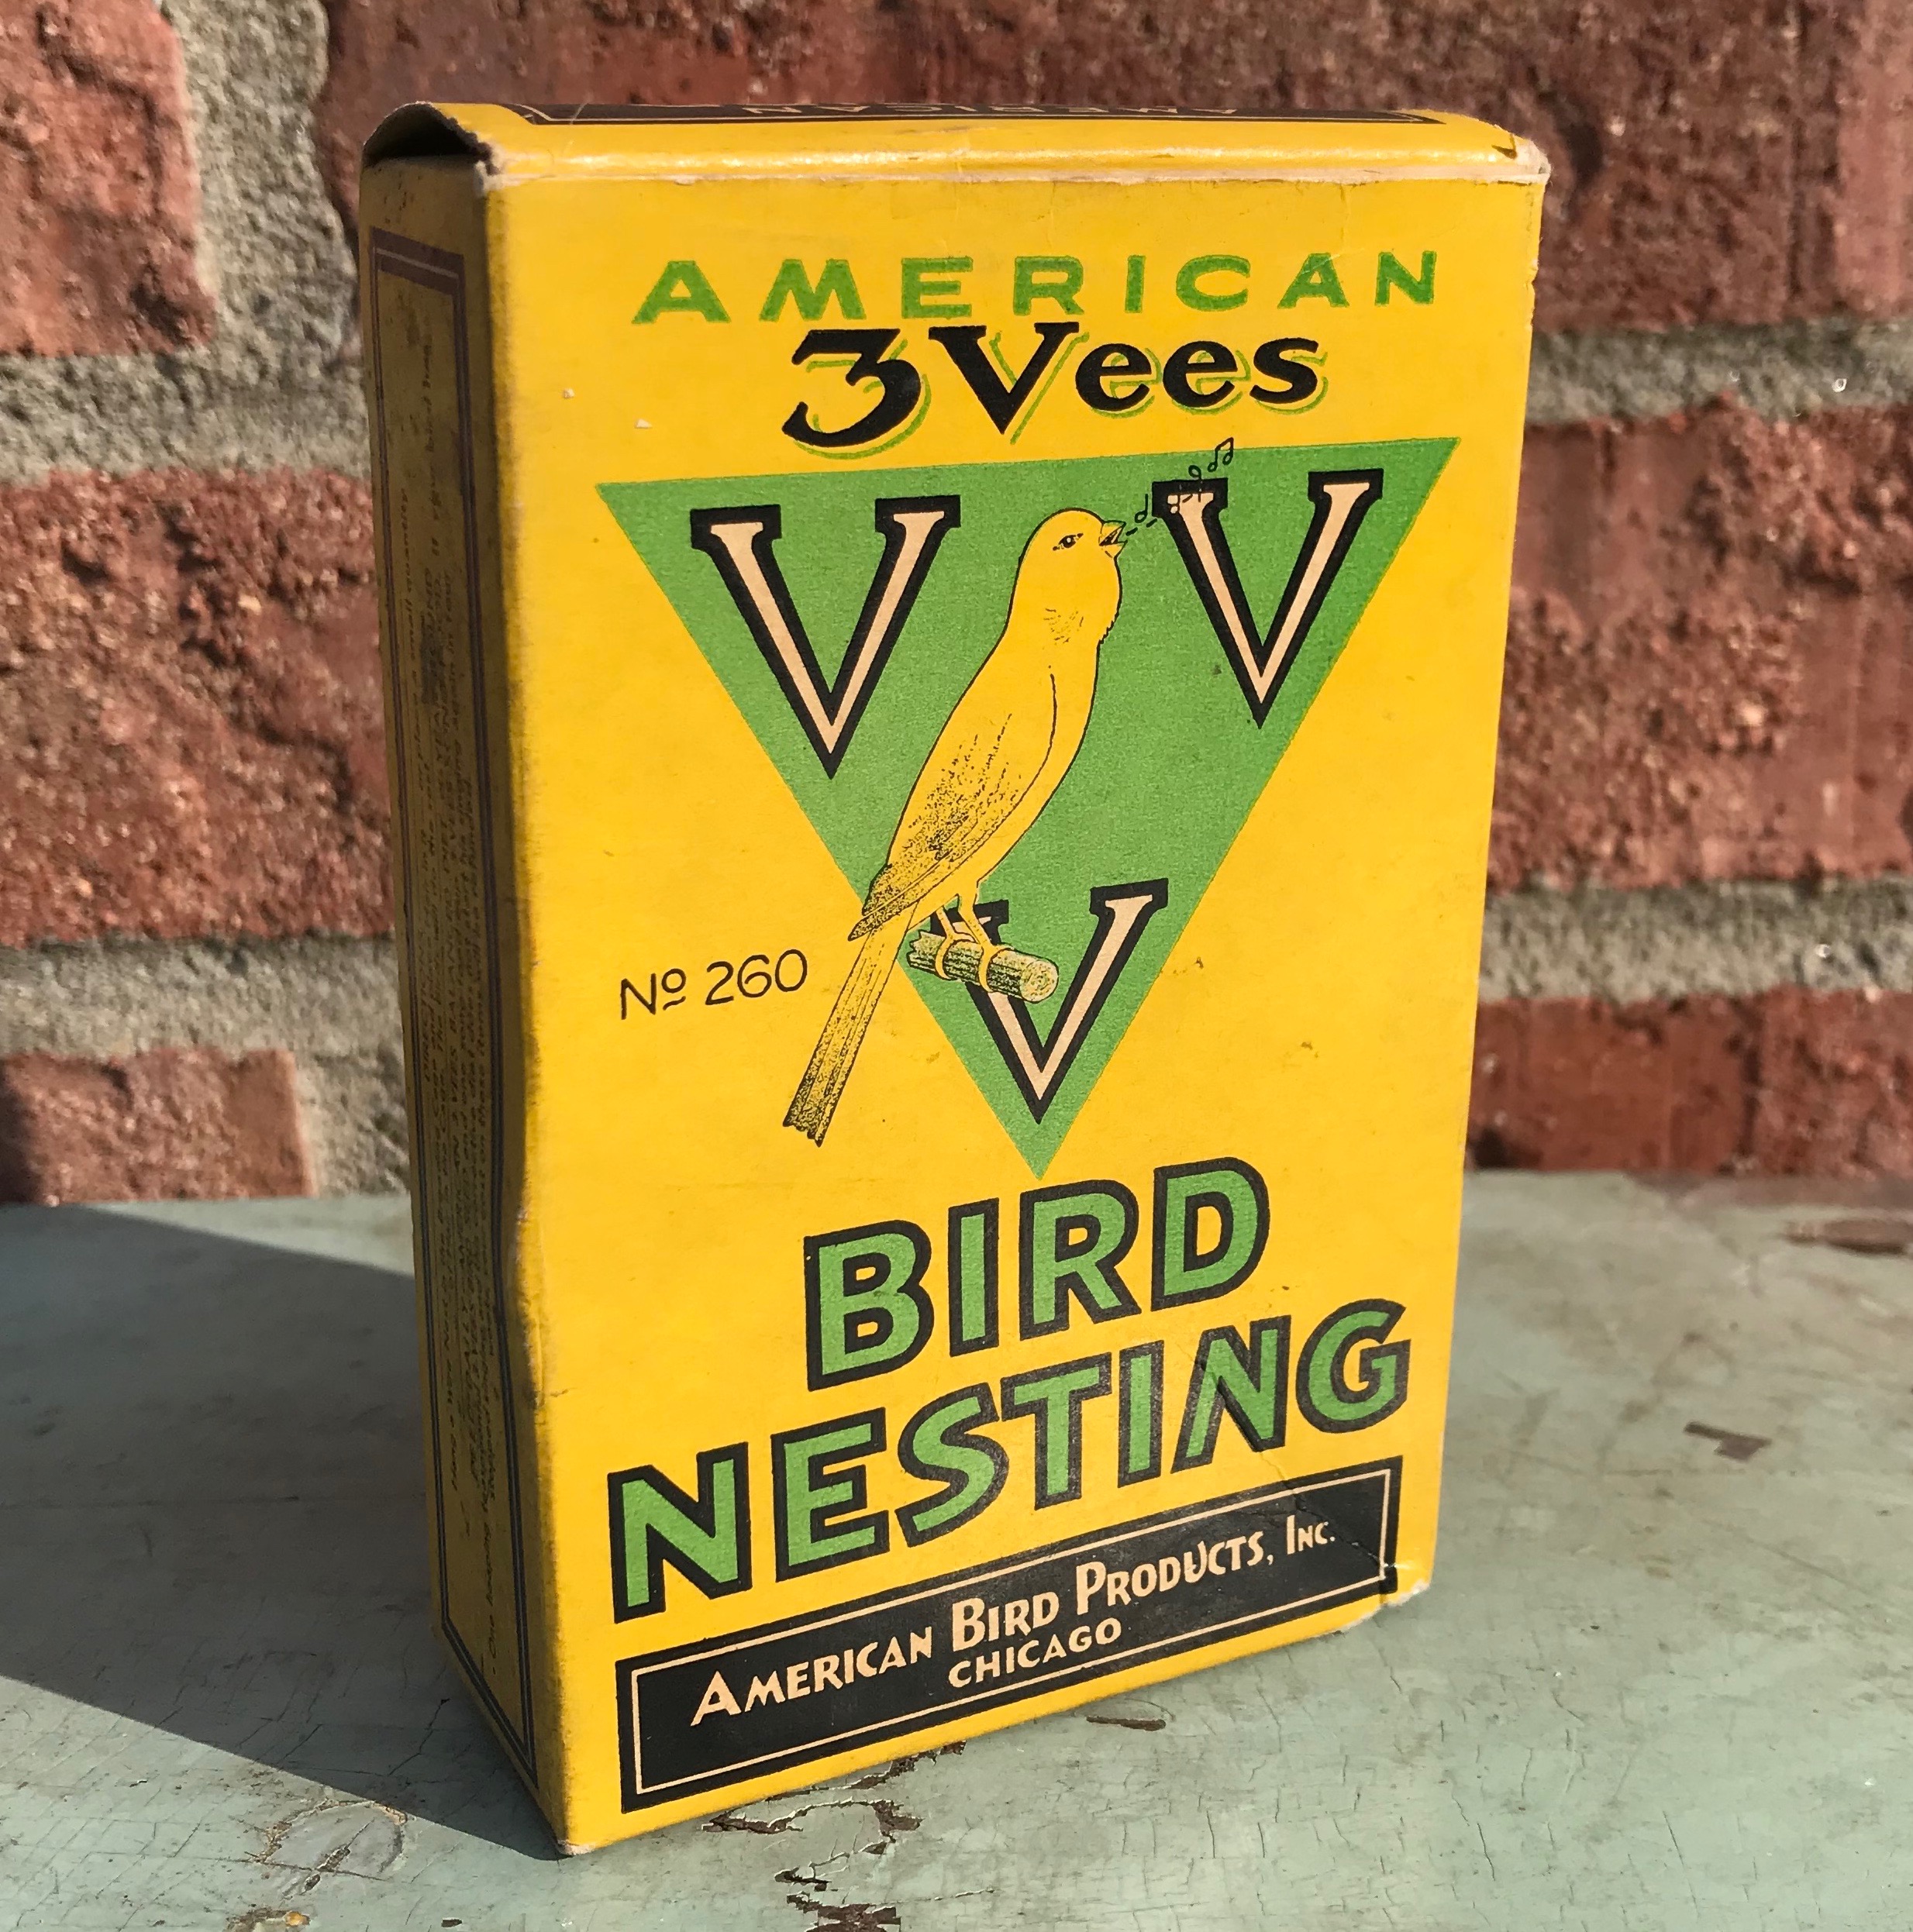 American Bird Products 3Vees History